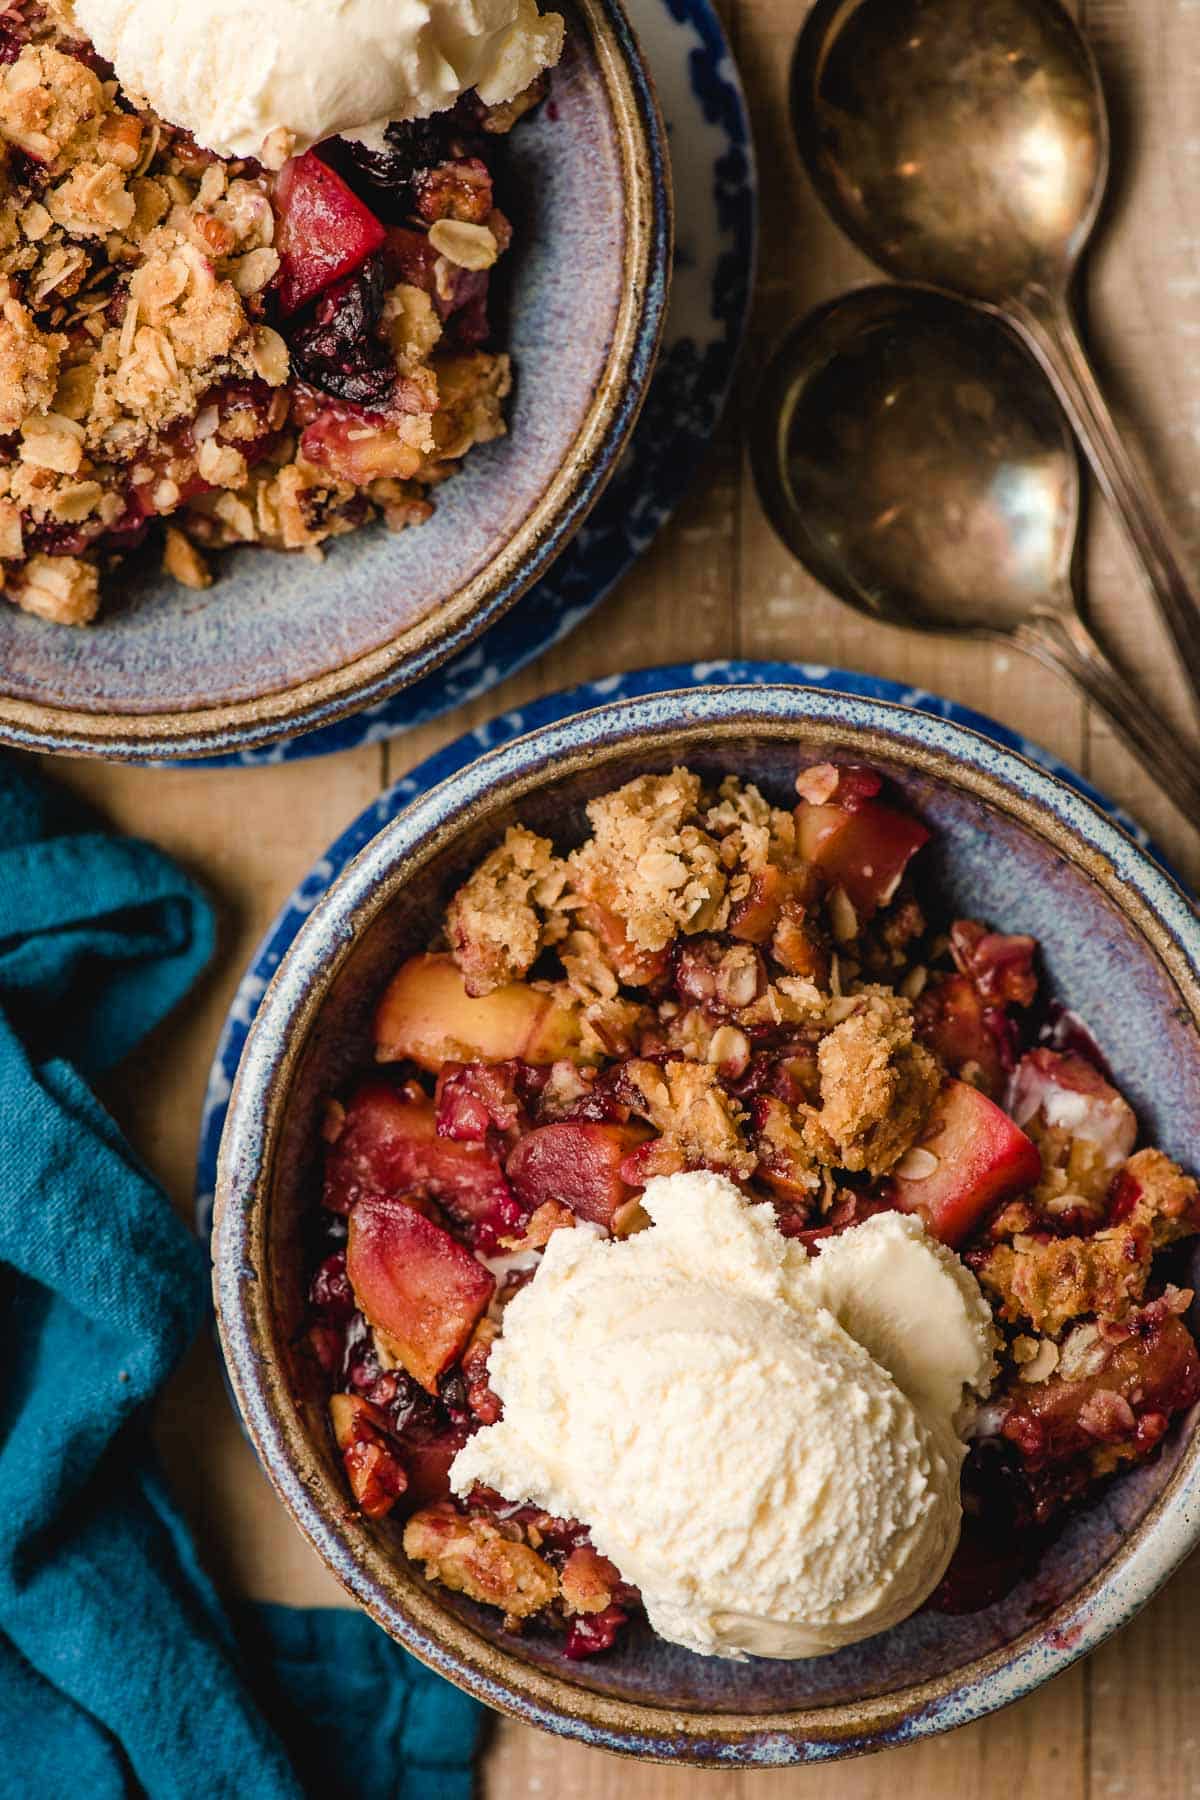 Scoop of ice cream atop a serving of apple blueberry crumble.